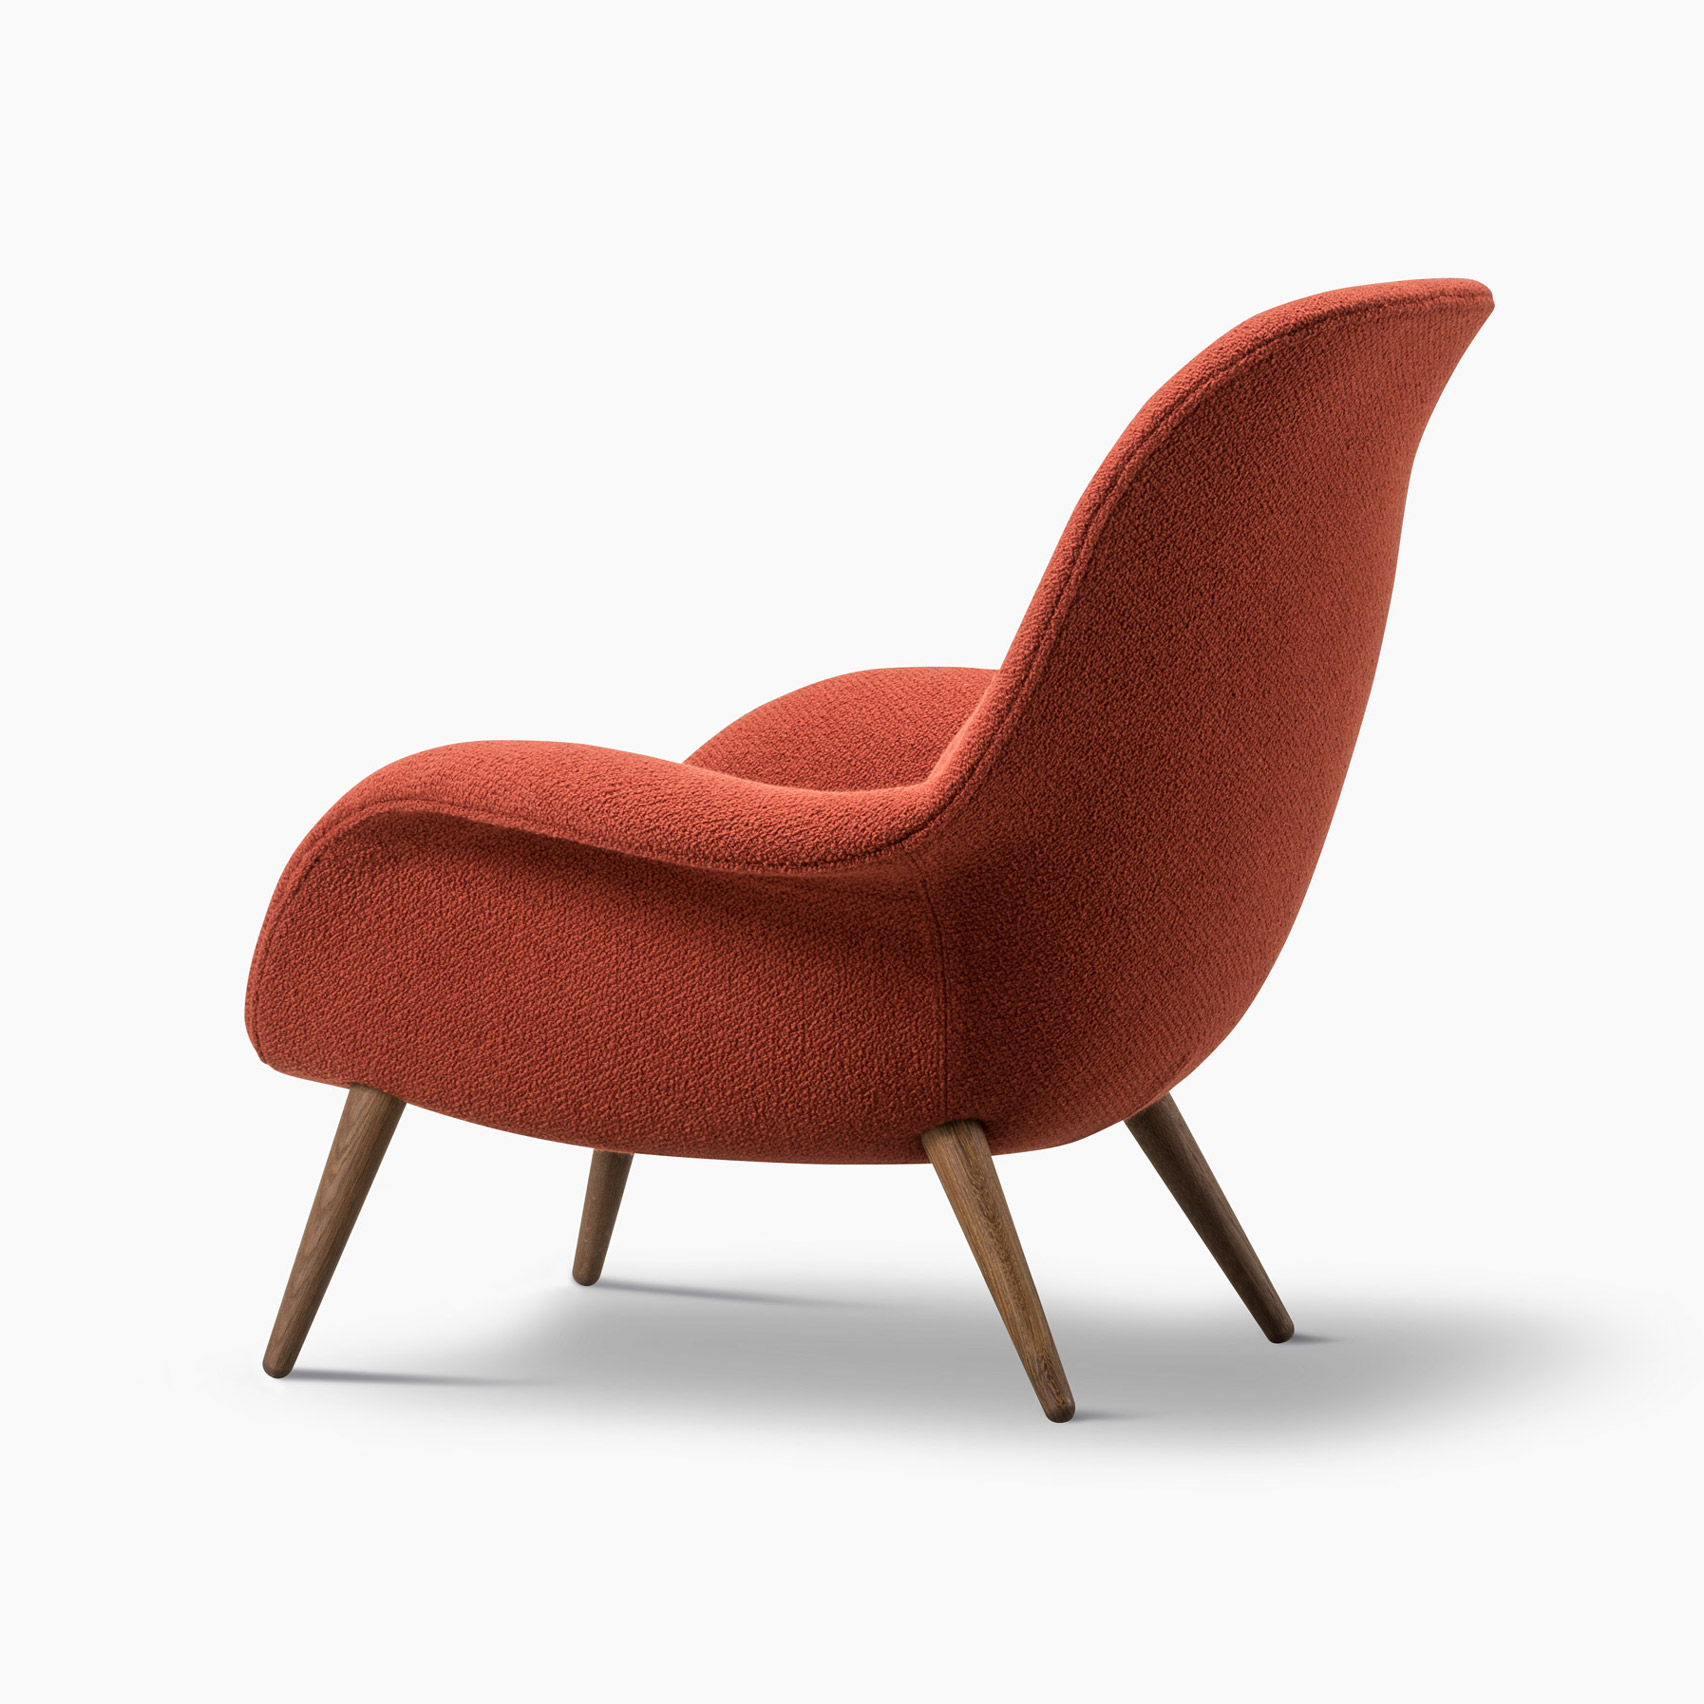 Swoon lounge chairs by Space Copenhagen for Fredericia